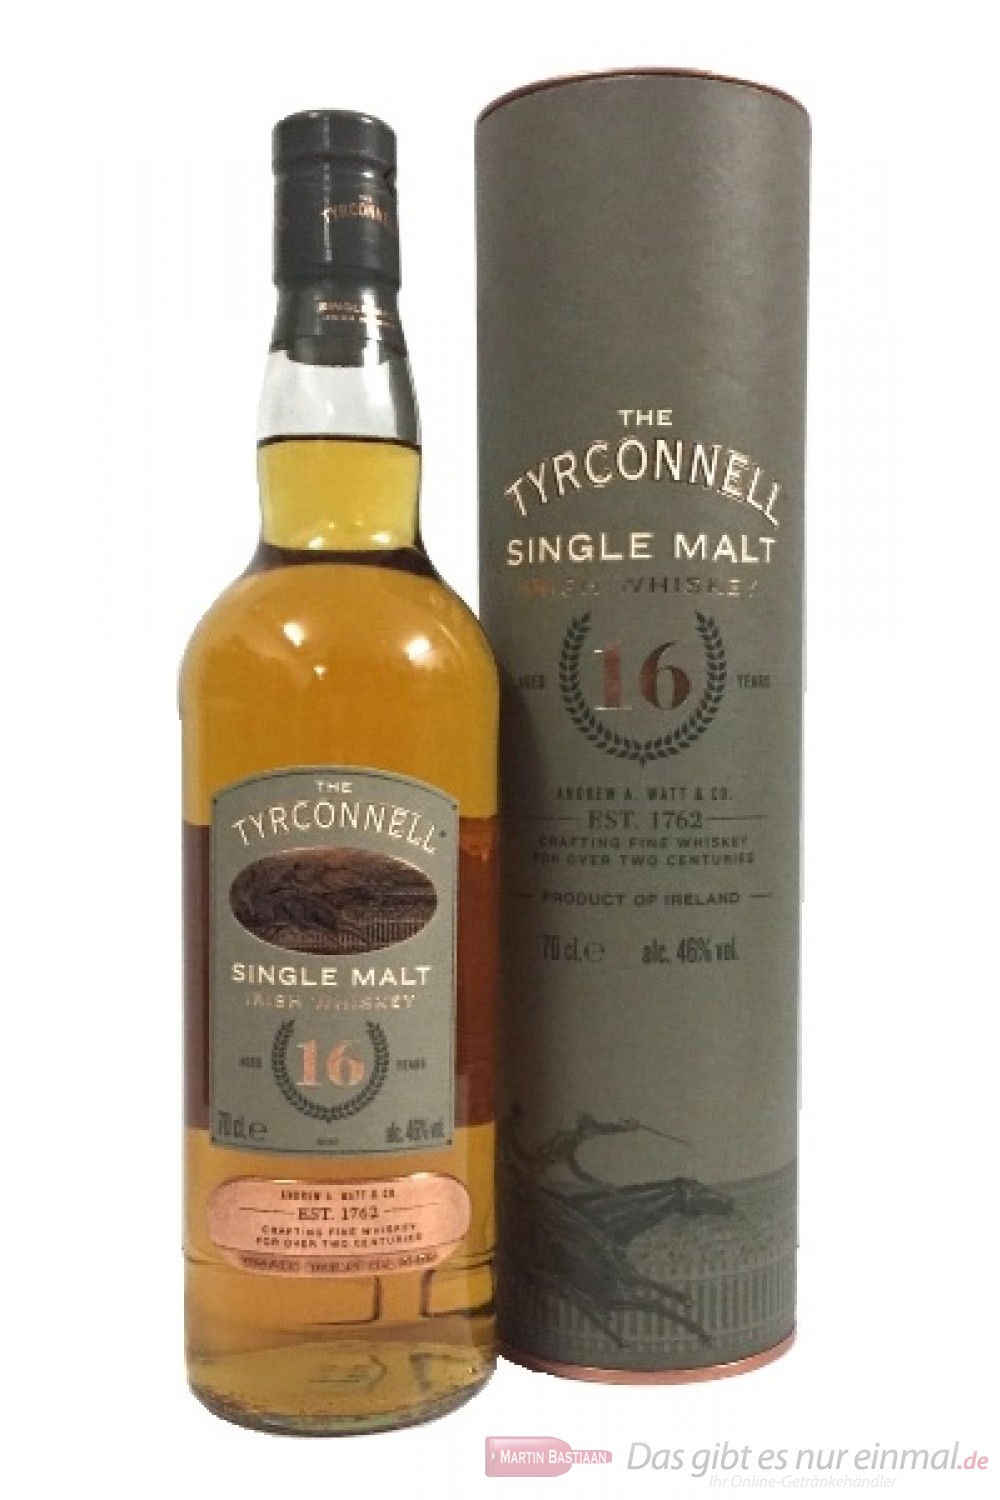 The Tyrconnell 16 Years